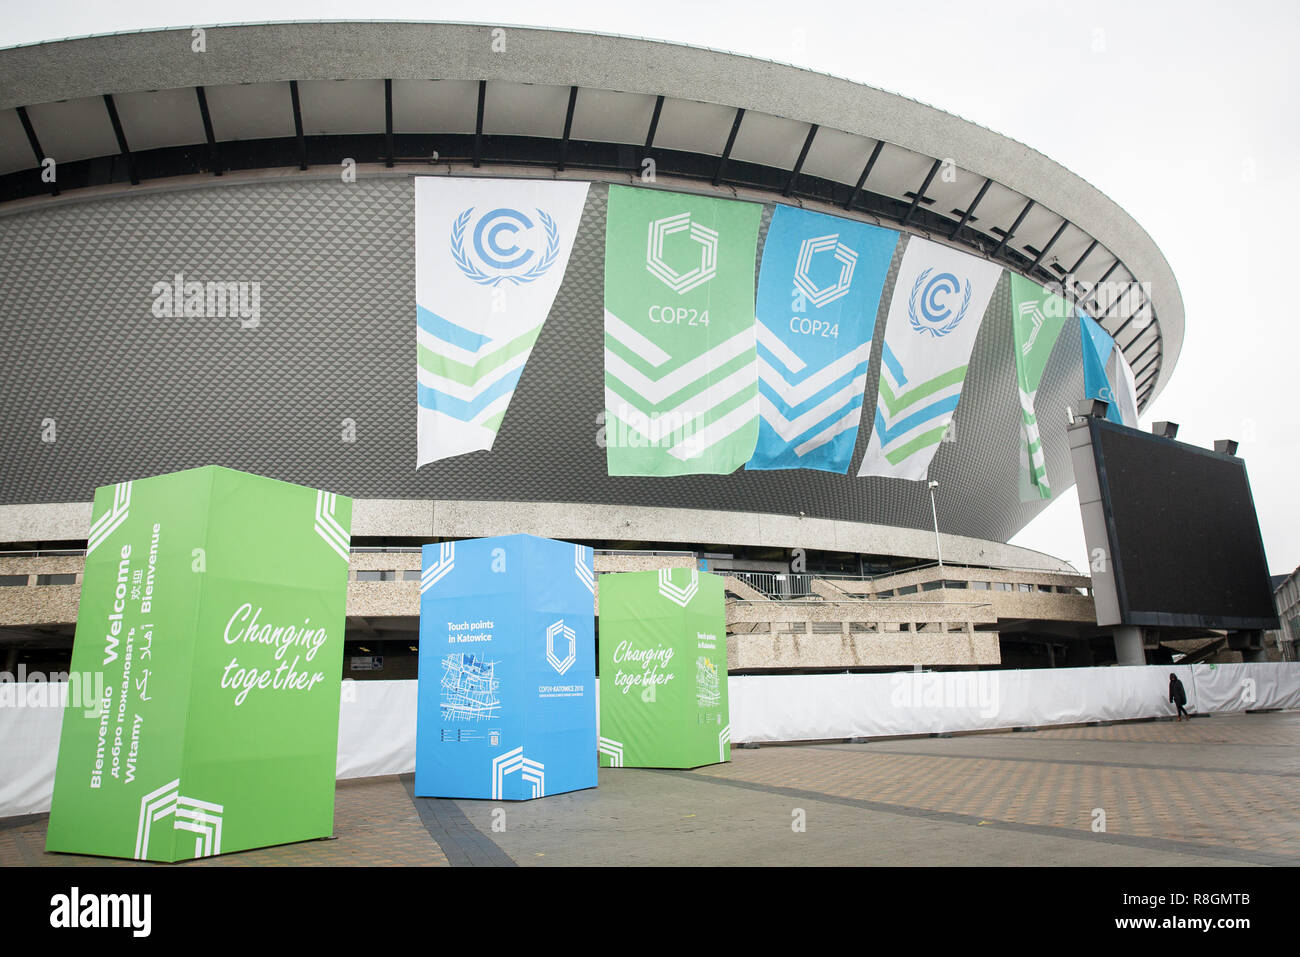 The Spodek Arena (International Congress Centre) during the UN Climate Change Conference (COP24) in Katowice, Poland on 3 December 2018 Stock Photo